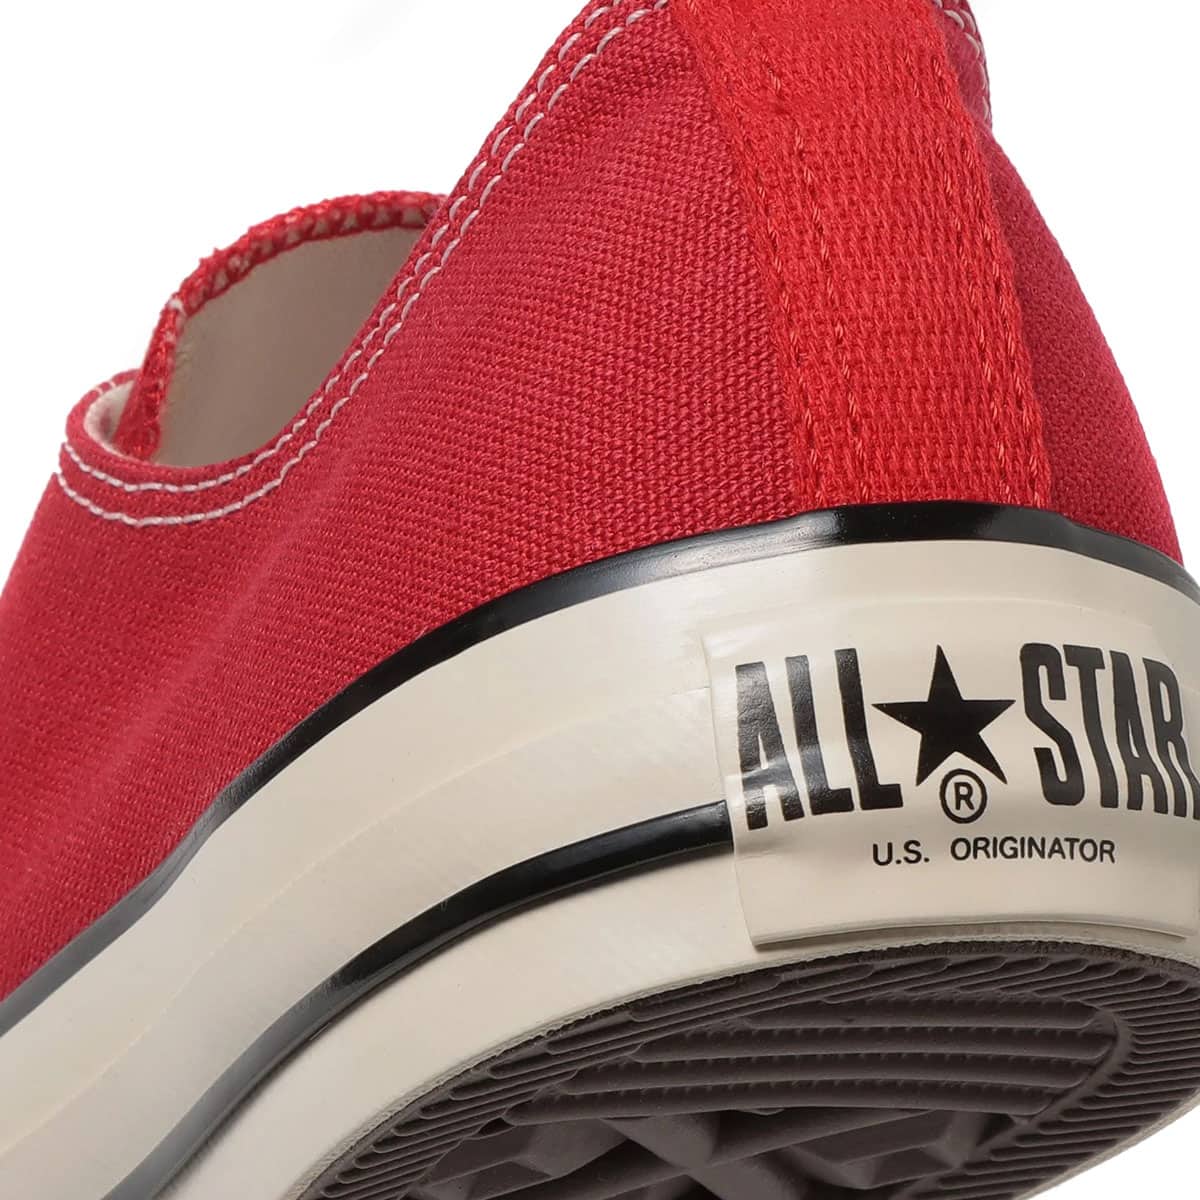 CONVERSE ALL STAR US OX CLASSIC RED 23SS-I